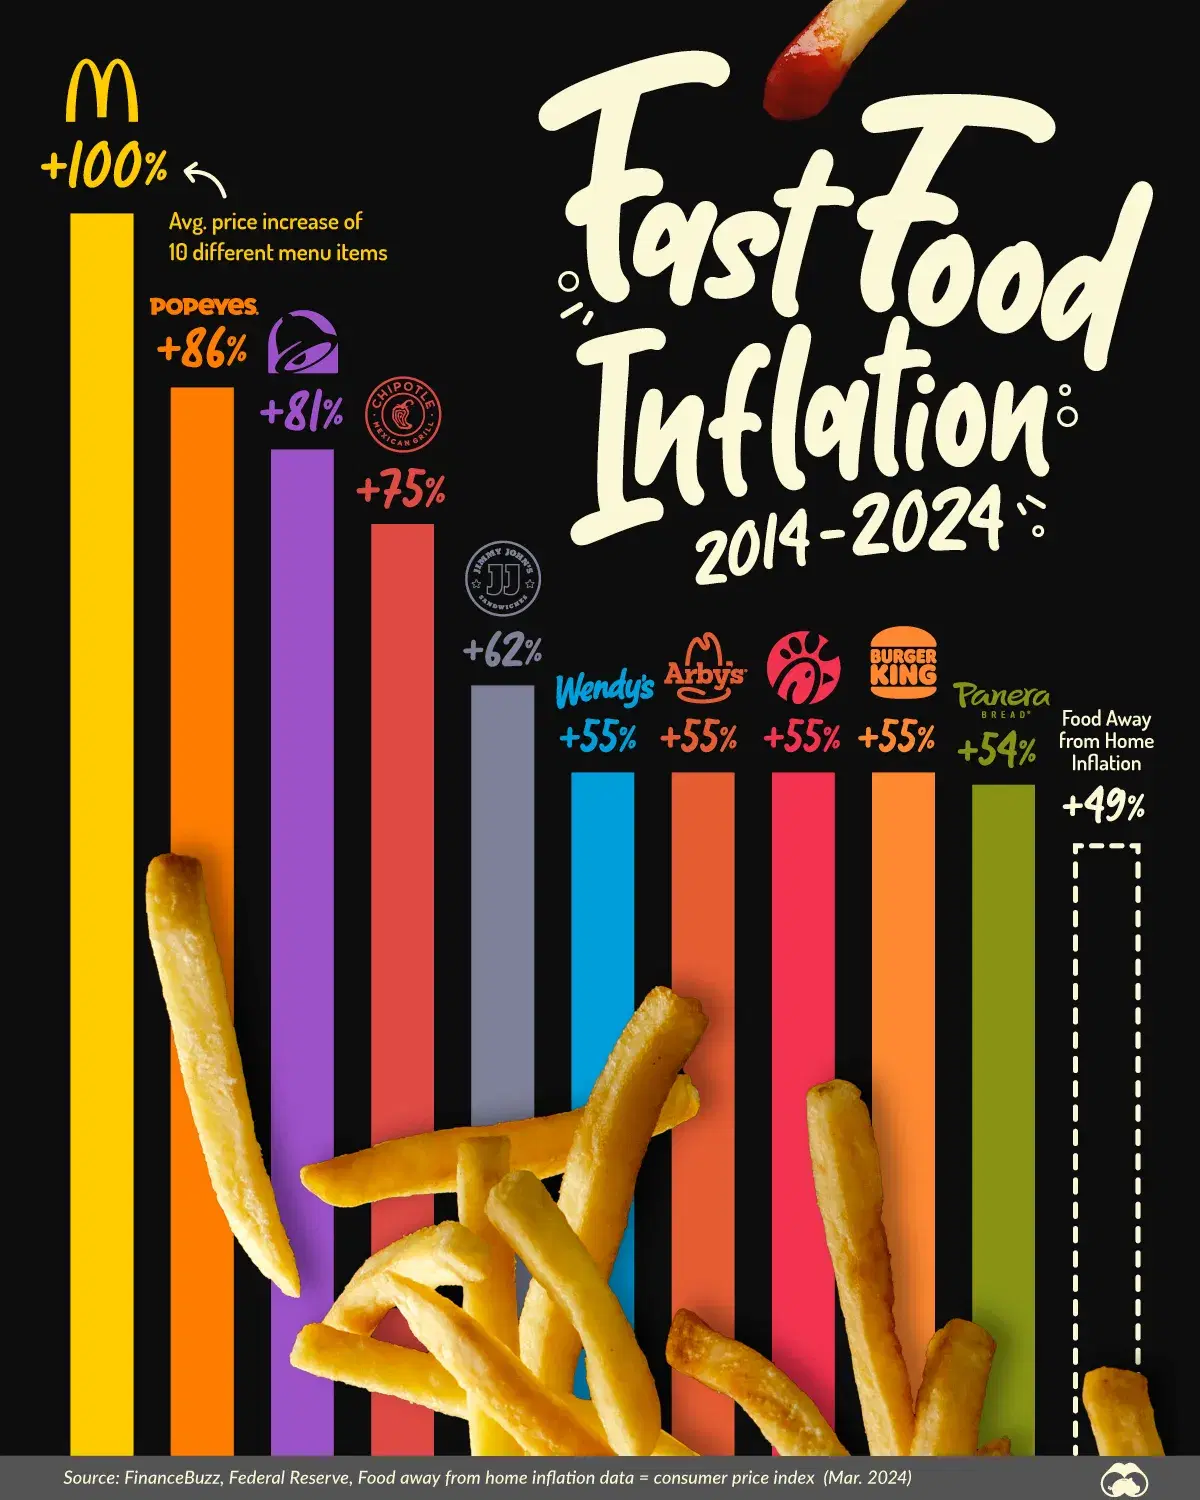 A Decade of Inflation Across Fast Food Chains